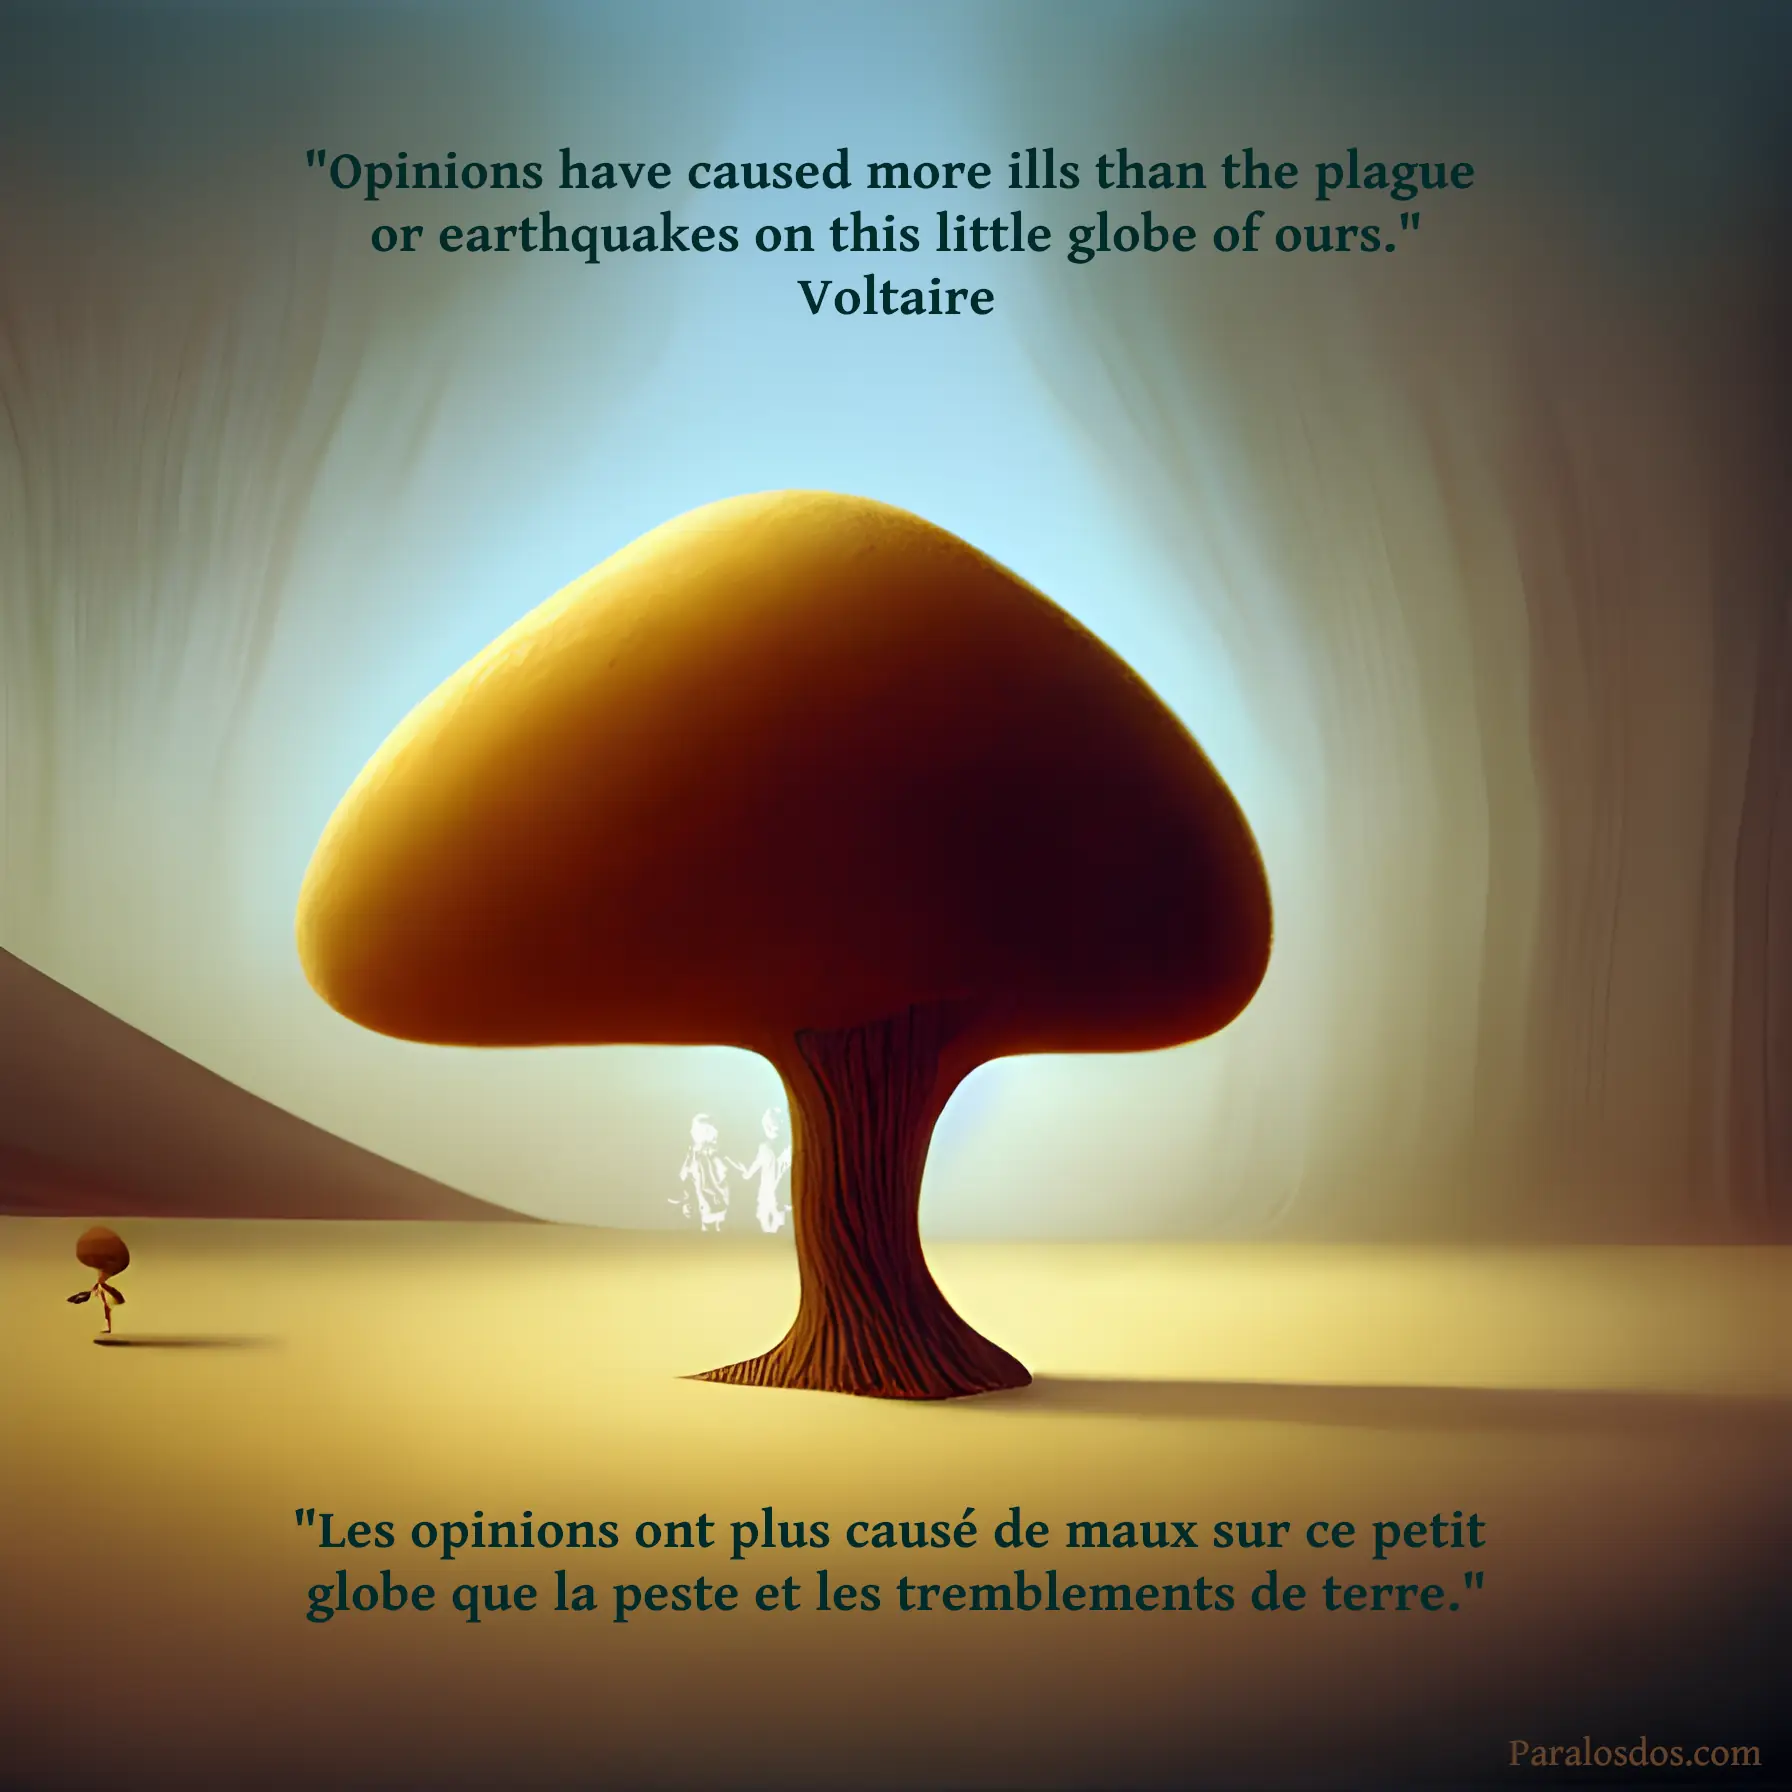 An artistic rendering of a big tree beside a small tree. The quote reads: "Opinions have caused more ills than the plague or earthquakes on this little globe of ours." - Voltaire